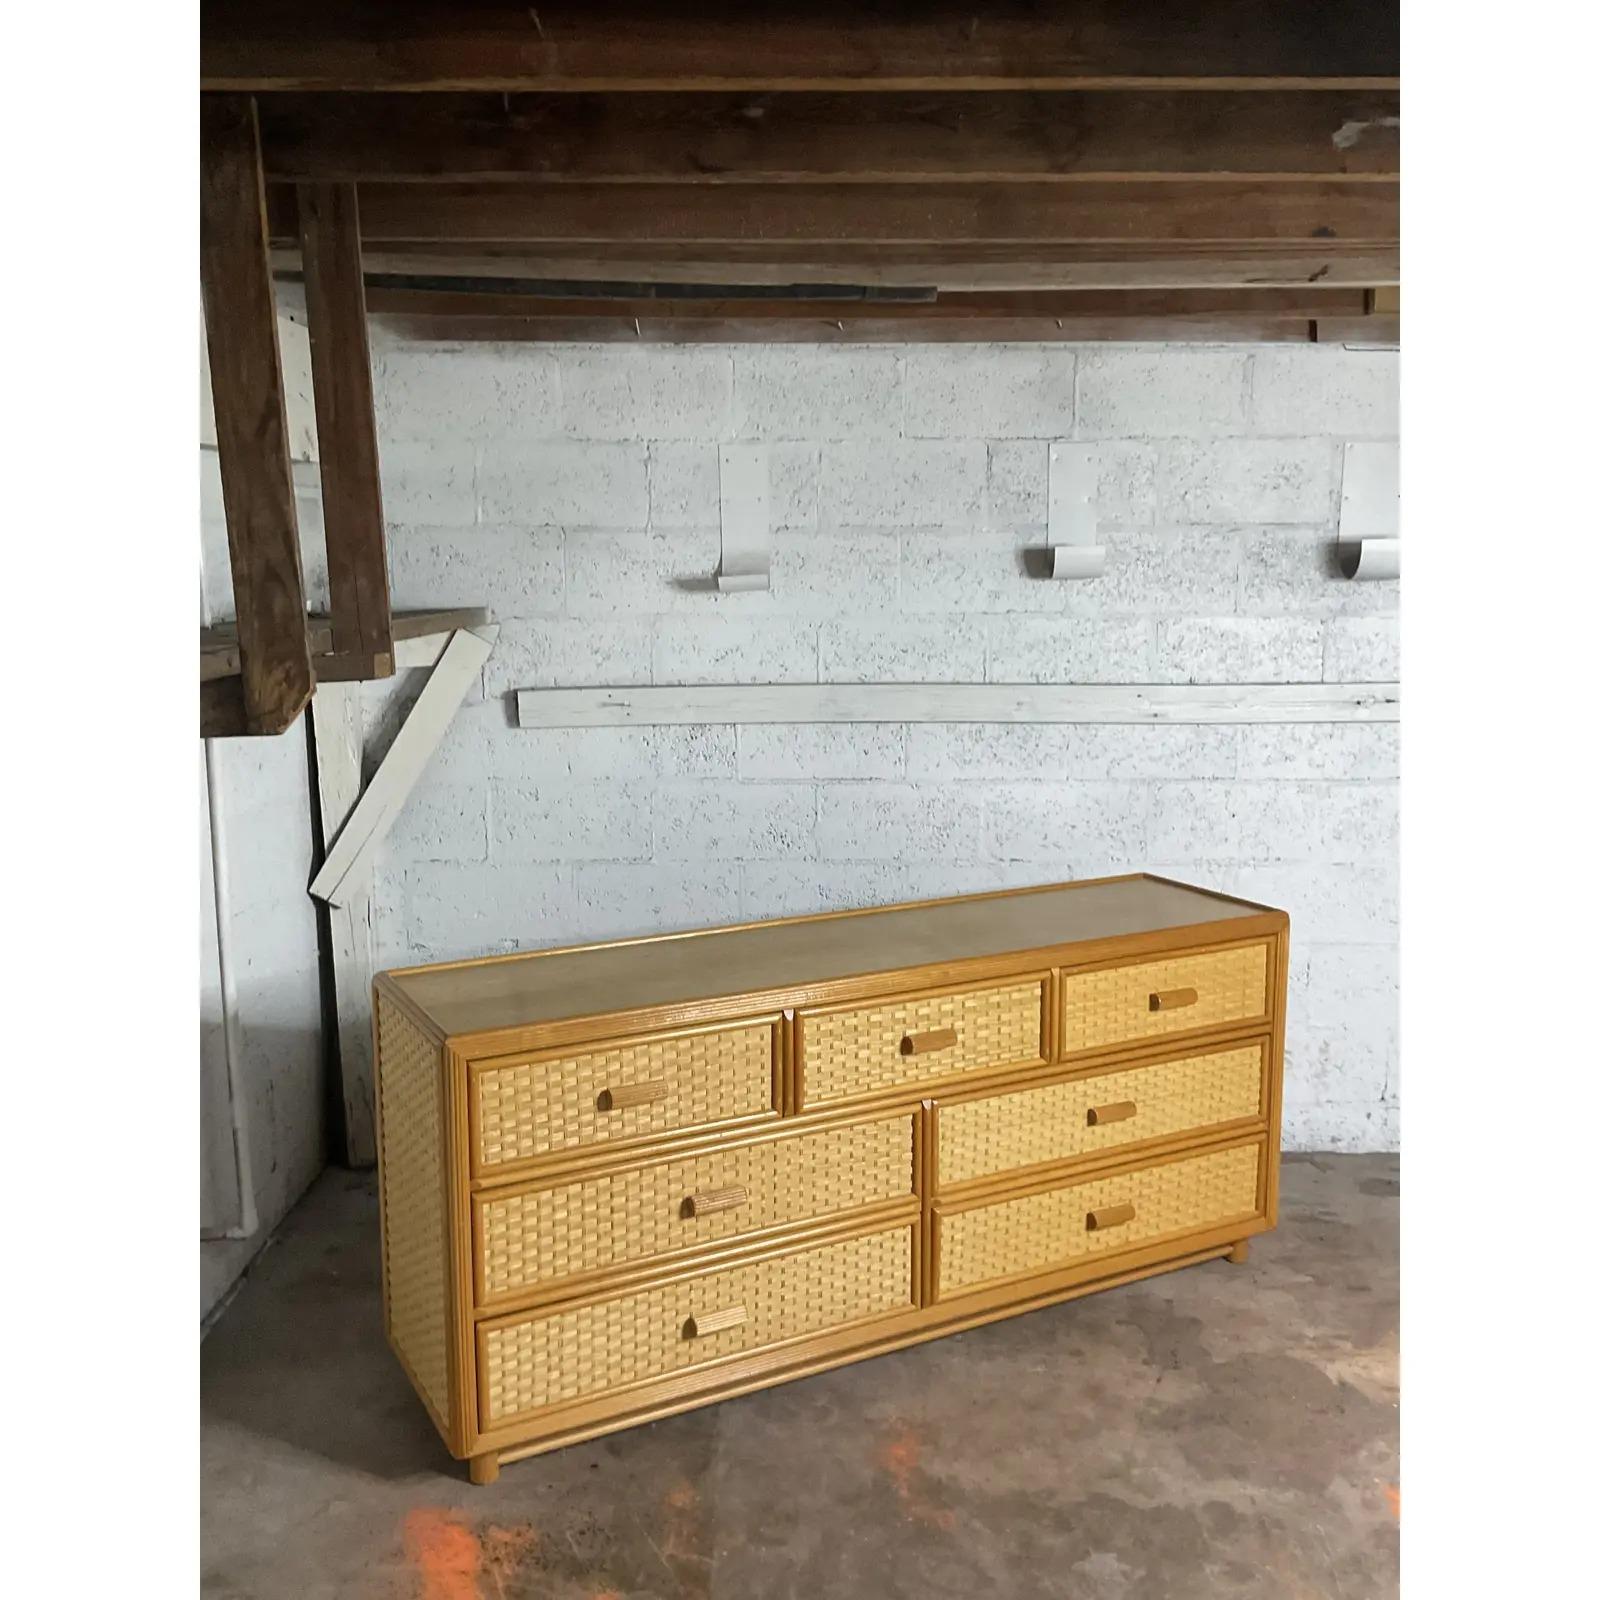 Fantastic vintage Coastal standard dresser. Beautiful warm blond wood cabinet with 7 woven rattan drawer fronts. Acquired from a Palm Beach estate.